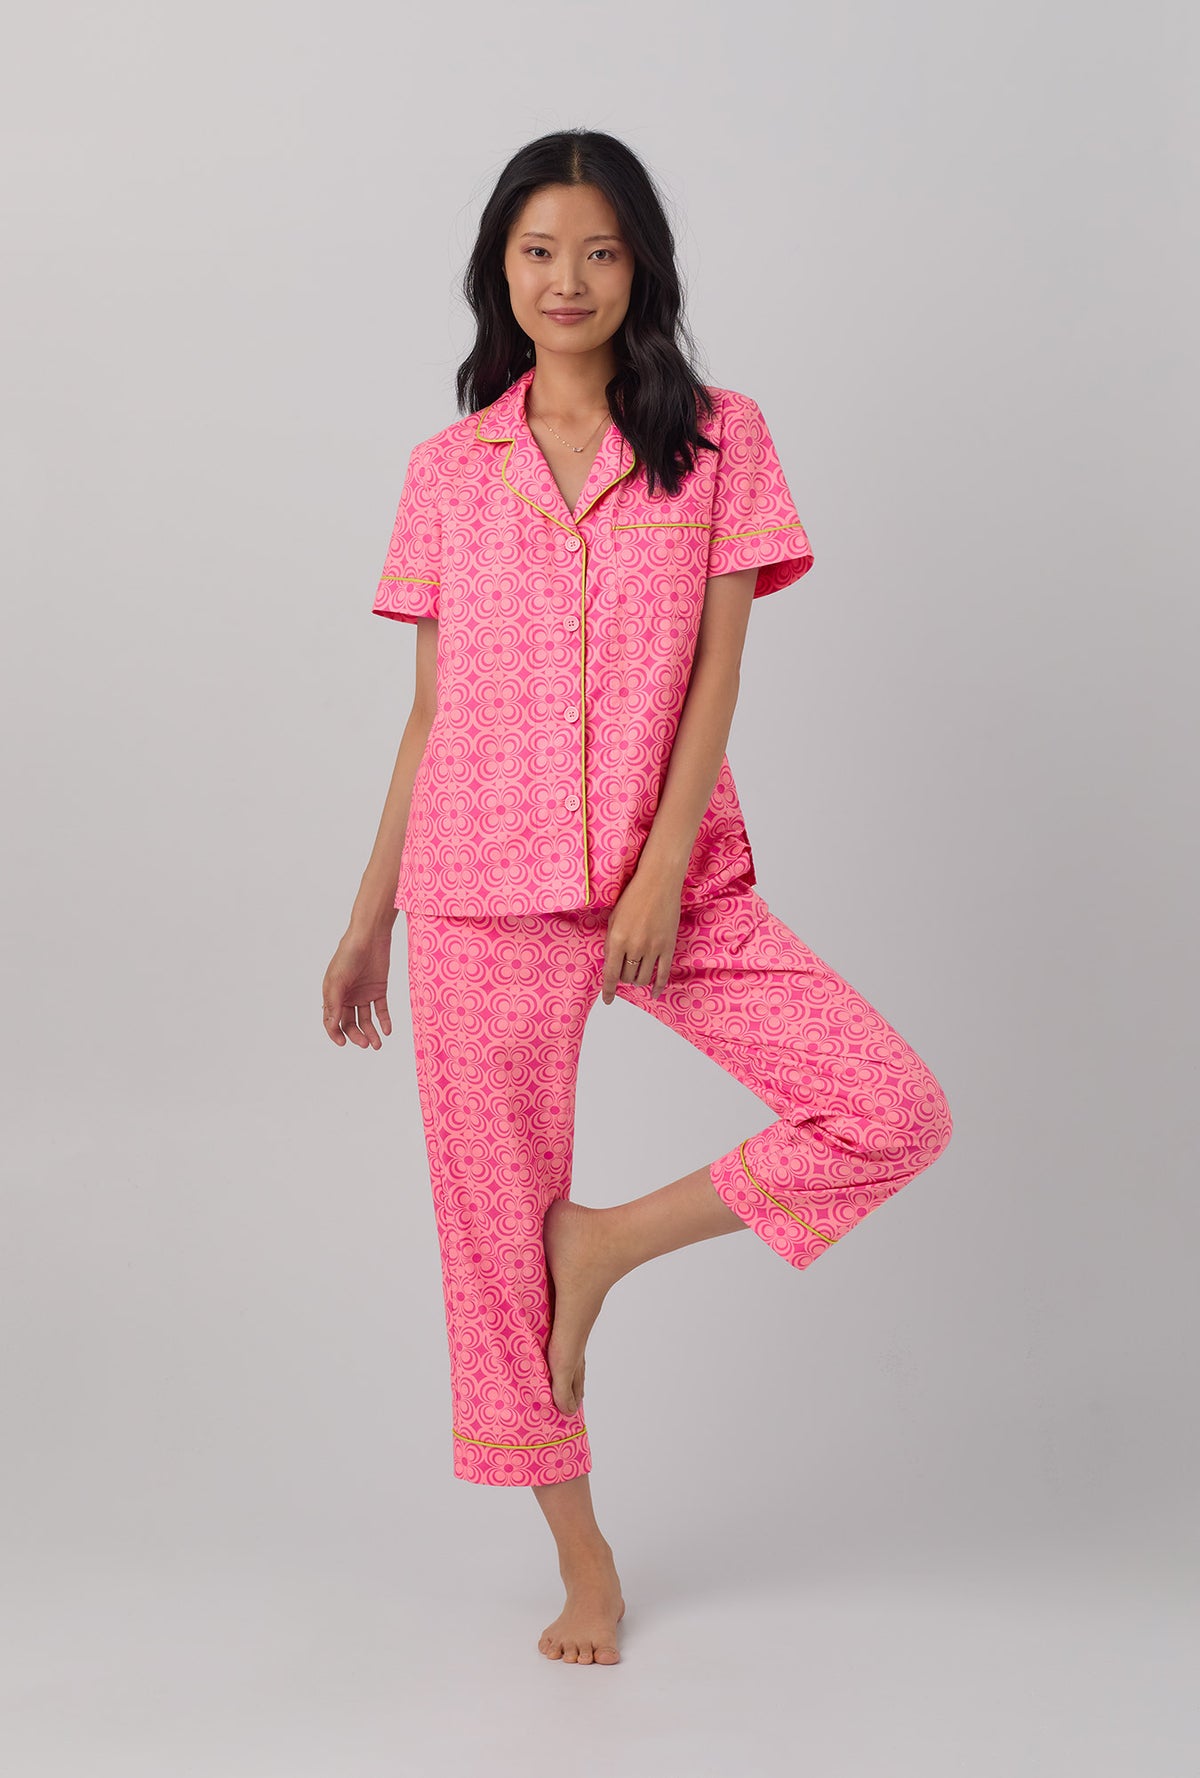 A lady wearing pink short sleeve cropped pj set with  summer geo print.